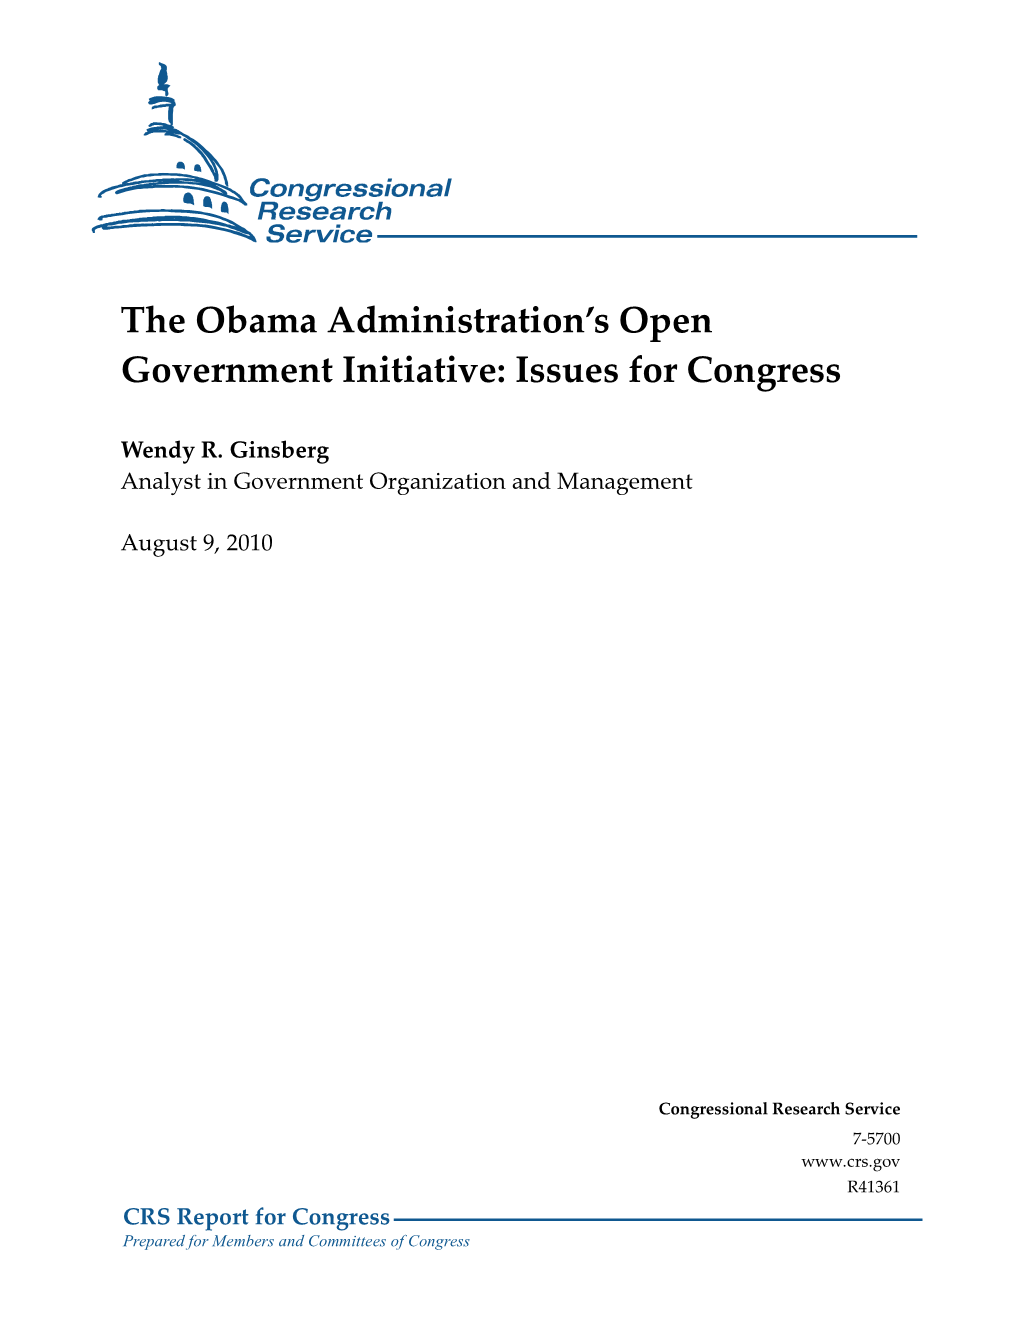 The Obama Administration's Open Government Initiative: Issues For